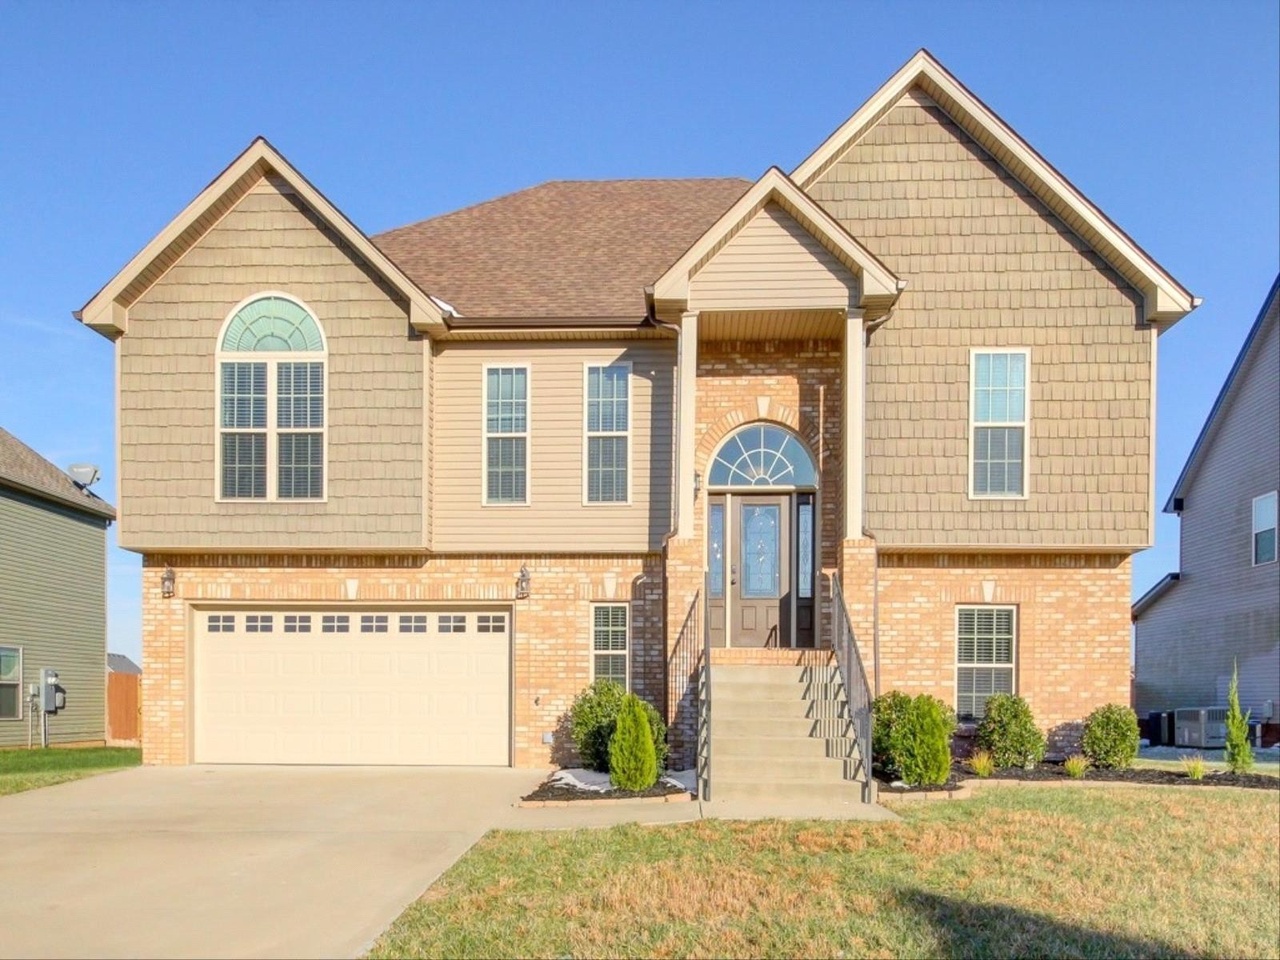 Spring Haven Homes For Sale In Spring Hill Tn